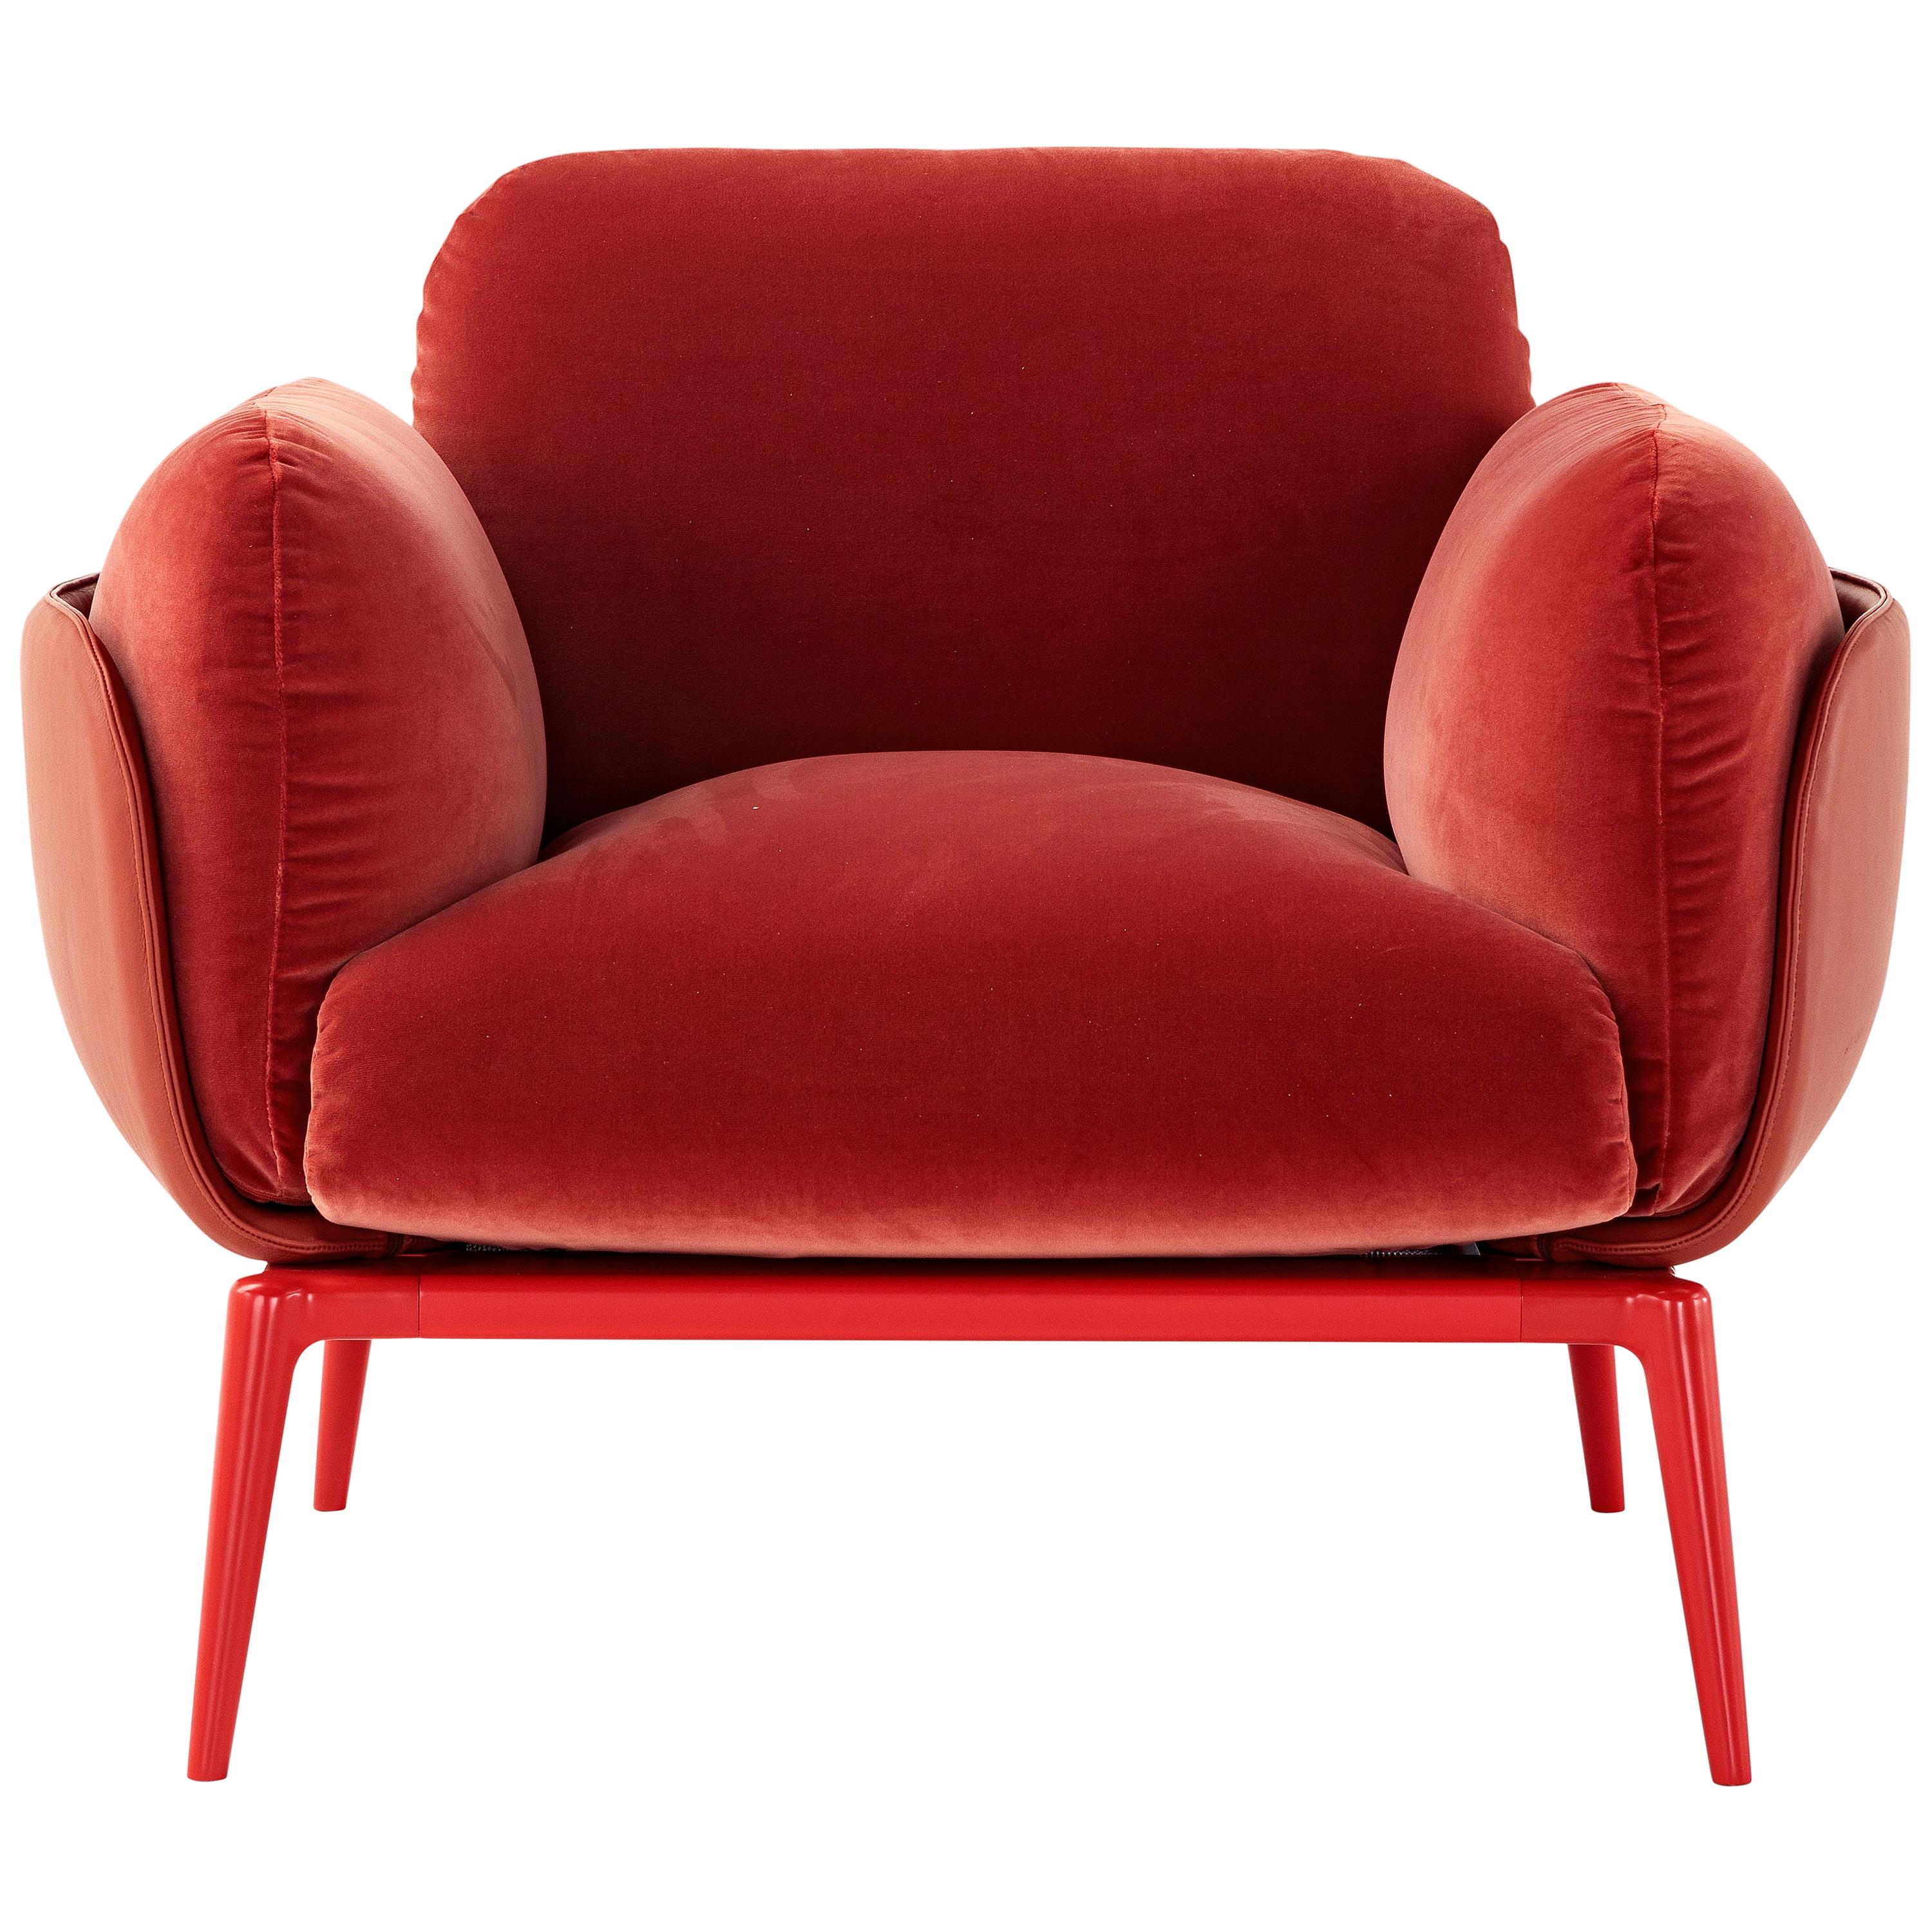 Amura Brooklyn Armchair in Red Leather and Velvet by Stefano Bigi For Sale